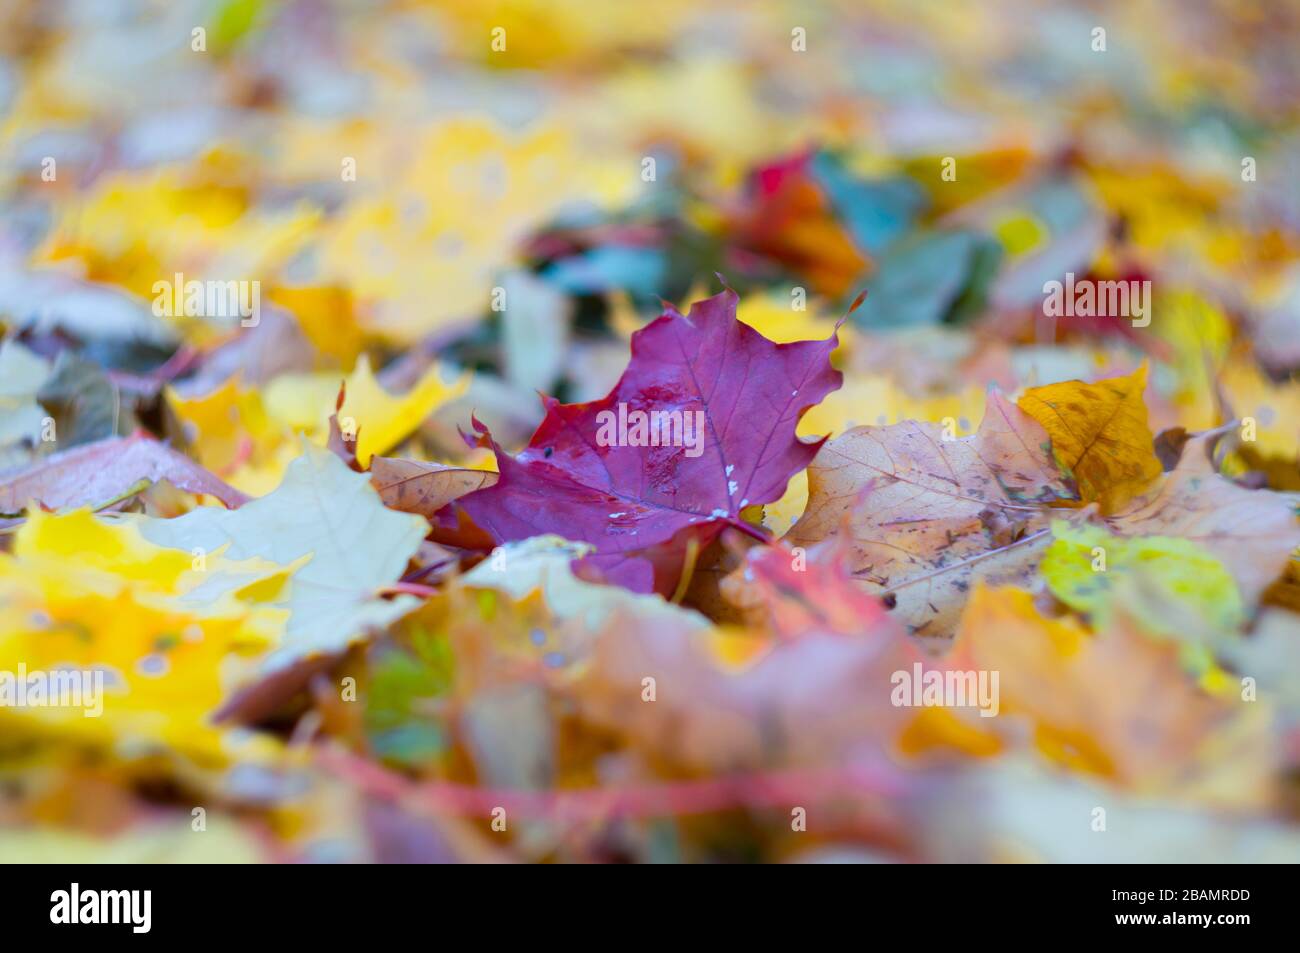 Bright burgundy maple leaf among the fallen leaves on the ground. Falling leaves. Autumn background. Soft focus, shallow depth of field. Stock Photo